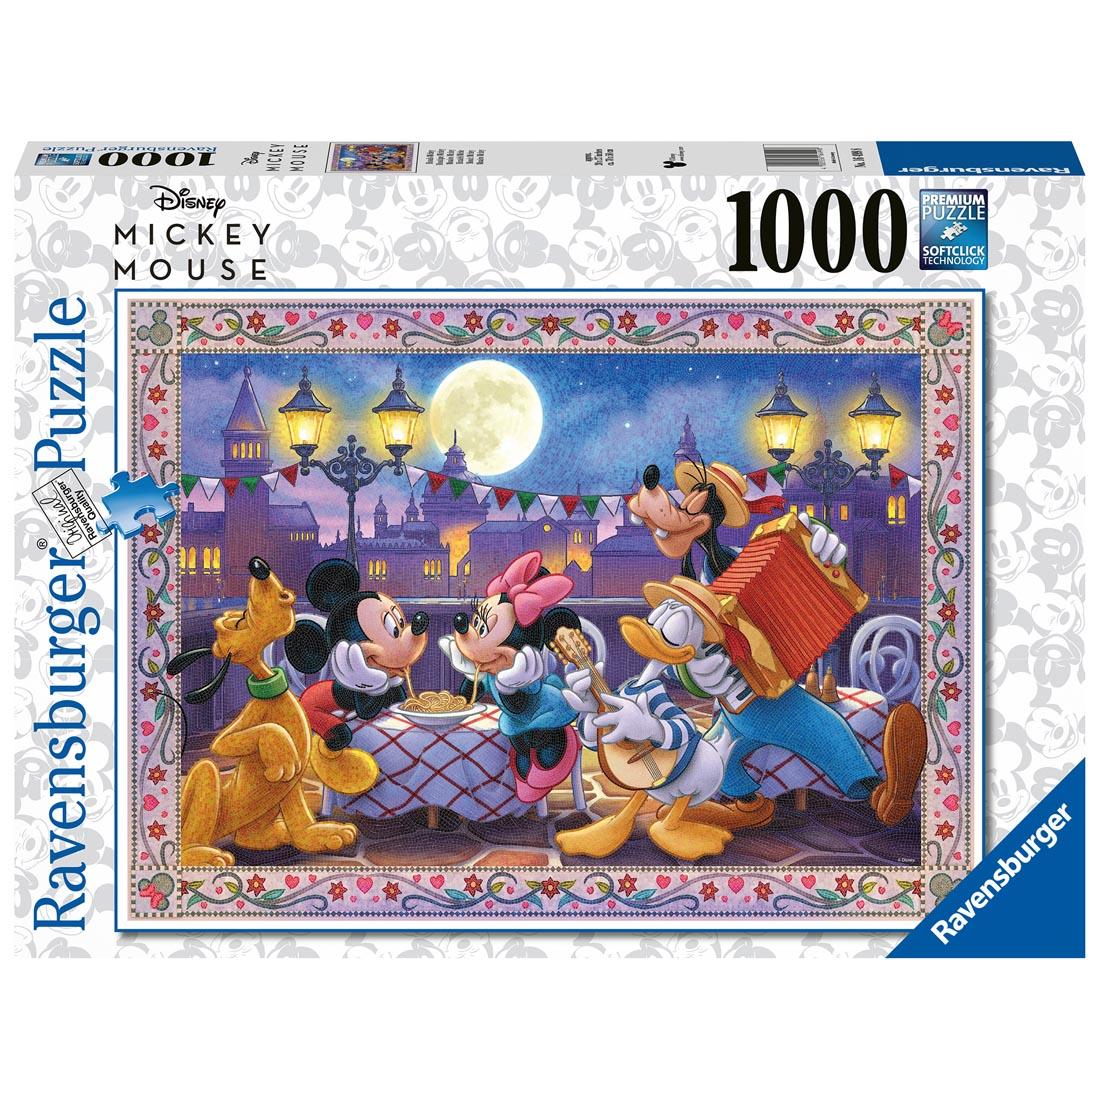 Mosaic Mickey Mouse 1000-Piece Puzzle by Ravensburger